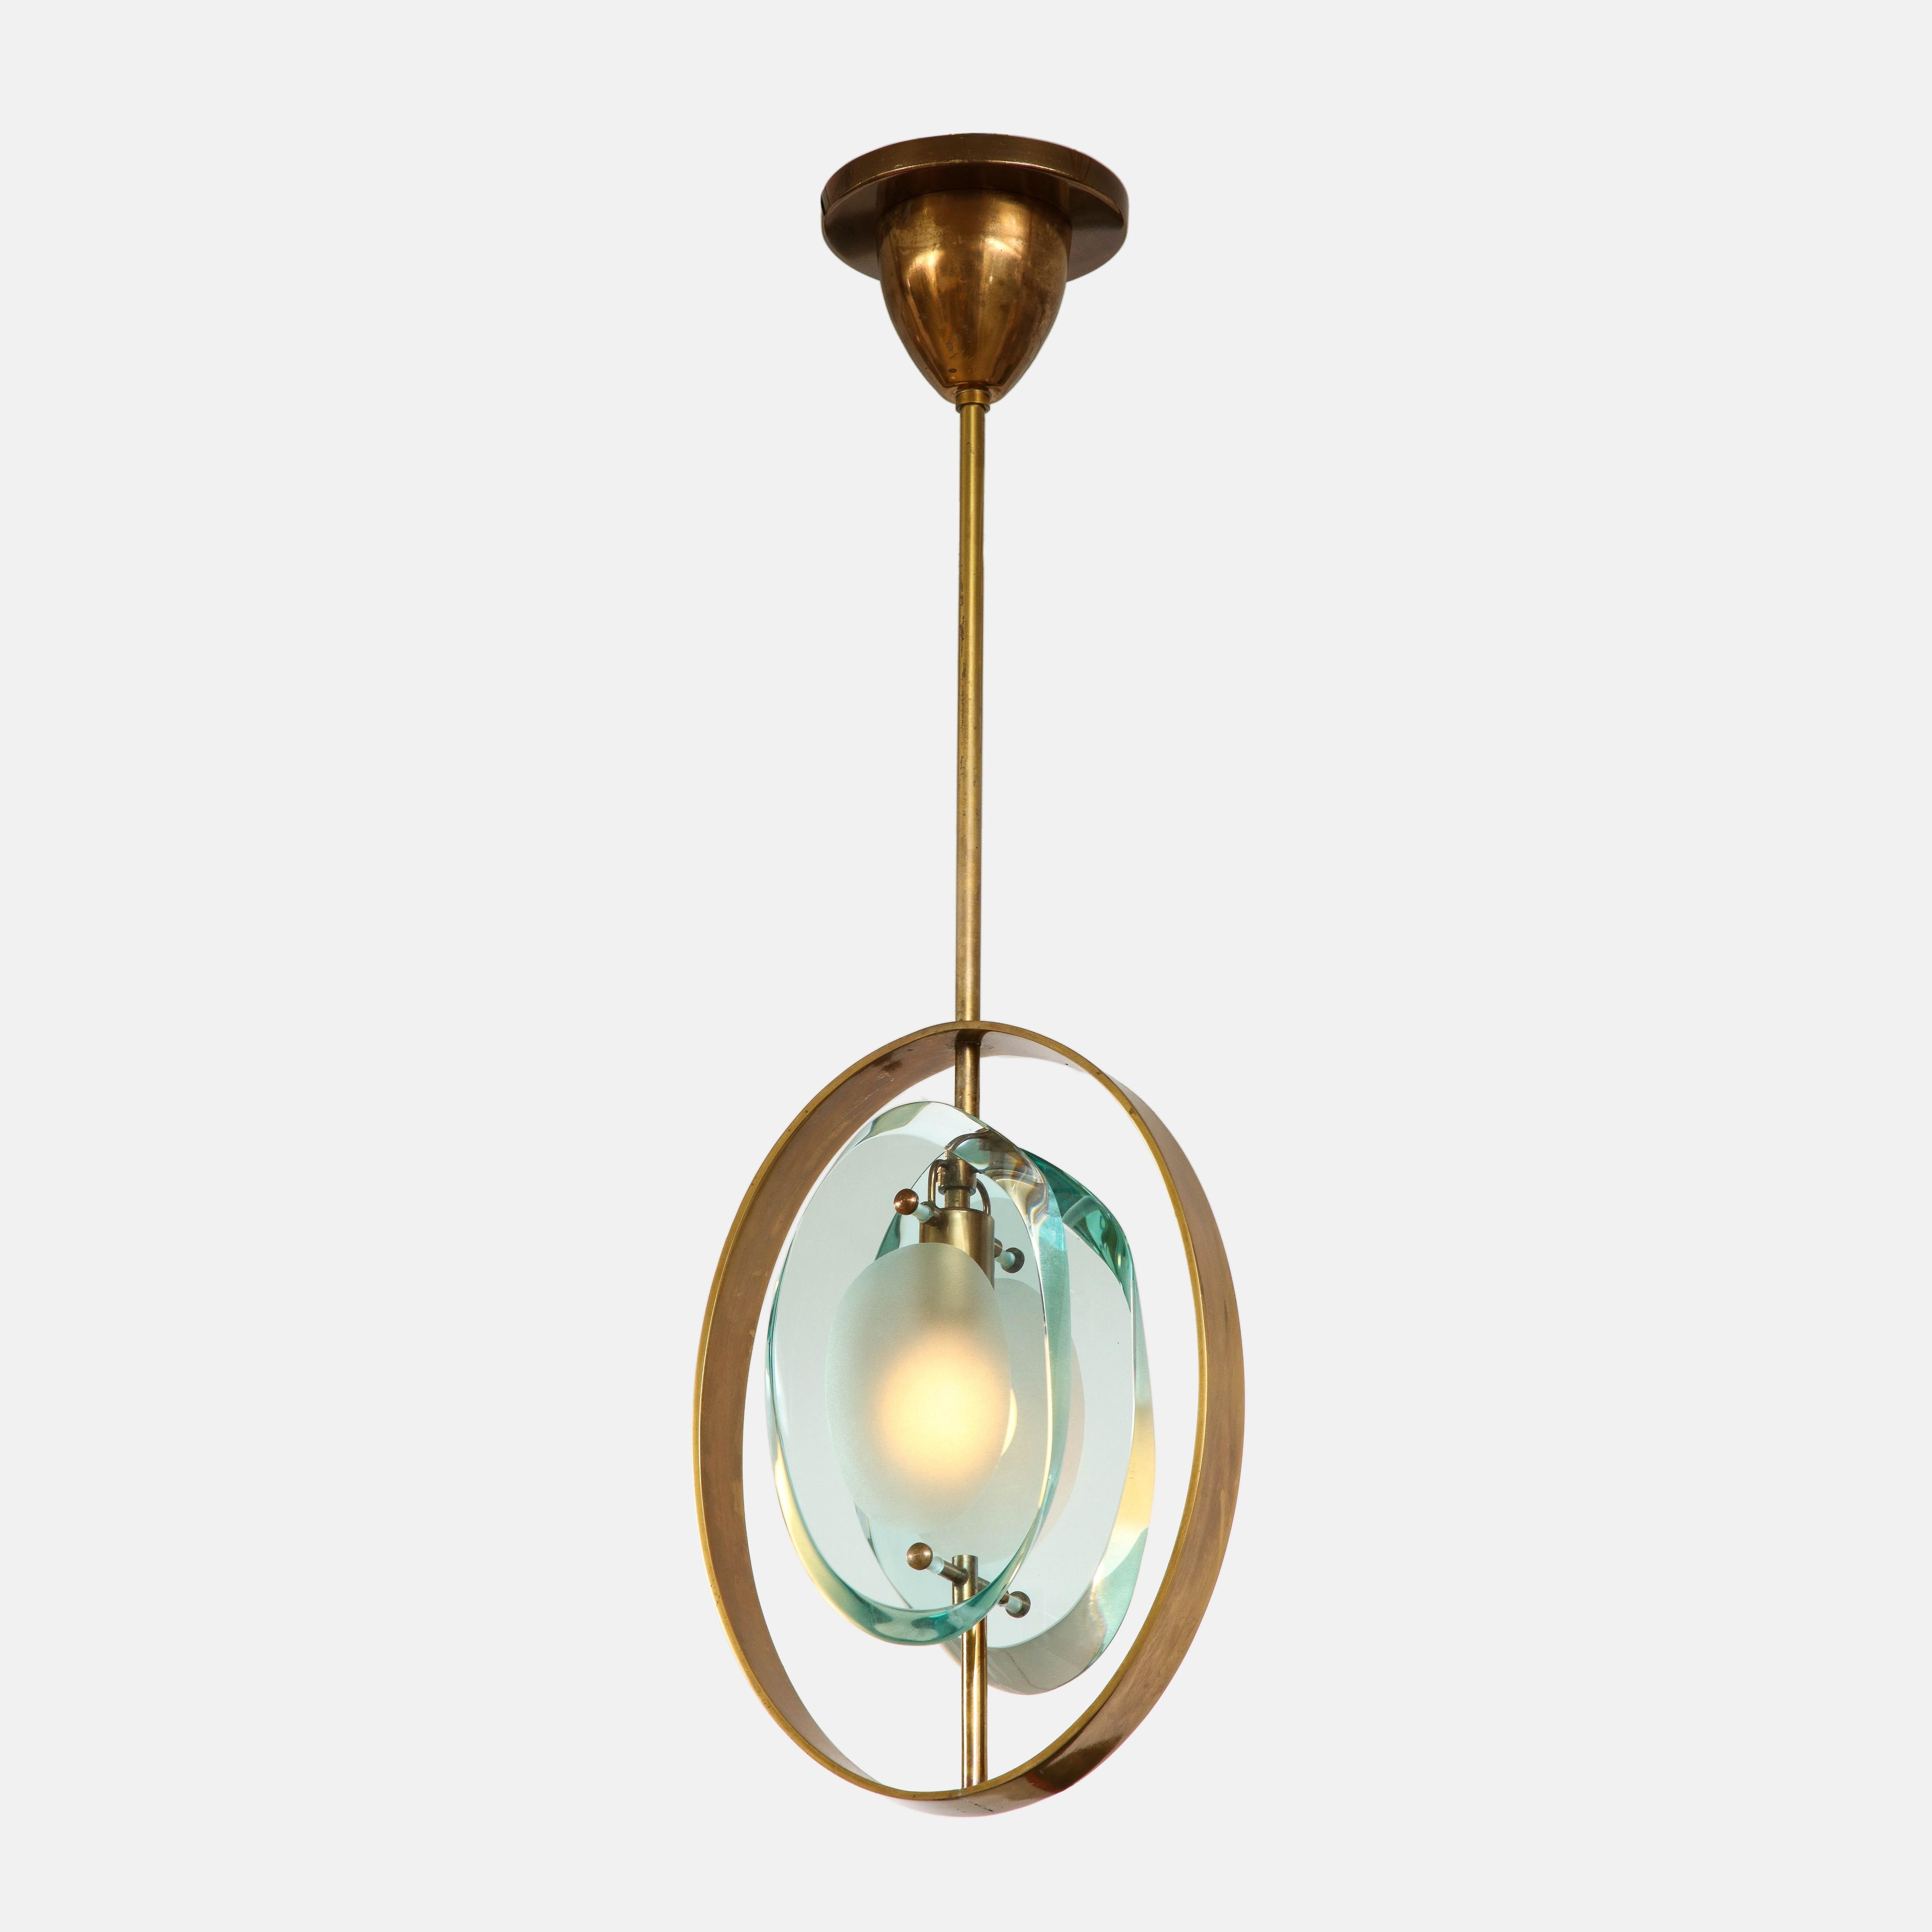 Max Ingrand for Fontana Arte exquisite pendant ceiling light model 1933 composed of double lens-cut plates of thick profiled polished glass with frosted glass centers suspended from brass structure with original canopy and custom ceiling plate,